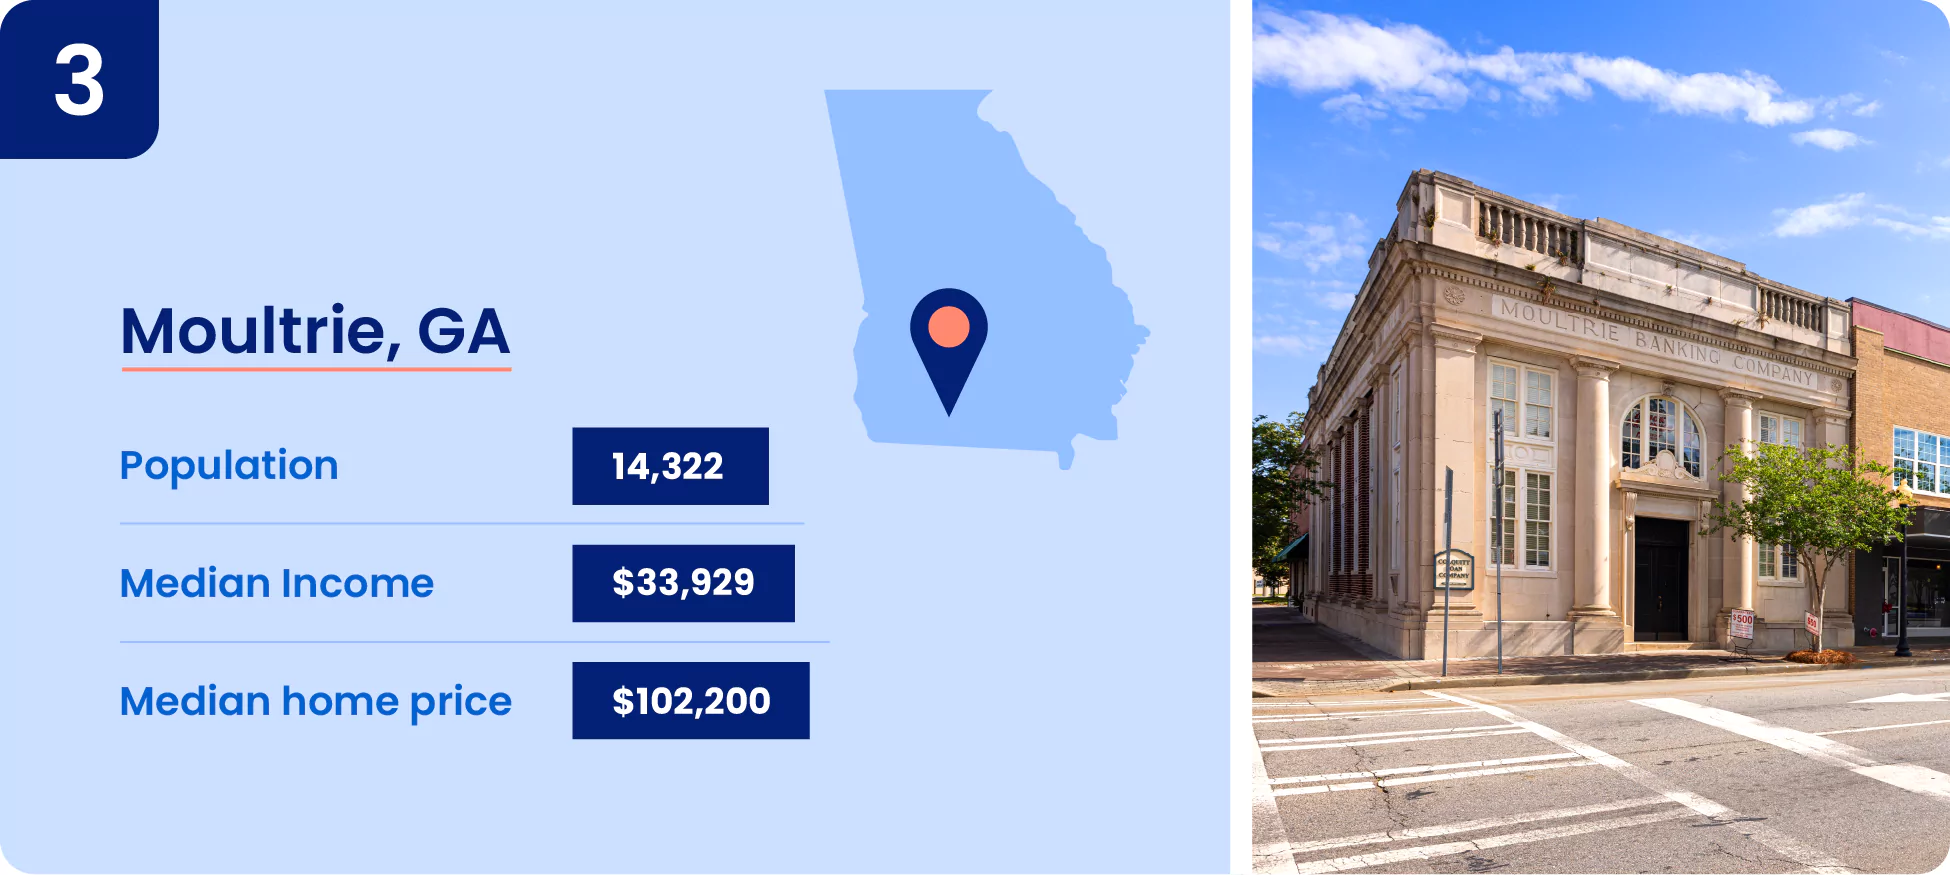 Image shows key information about one of the cheapest place to live in Georgia, the city of Moultrie.